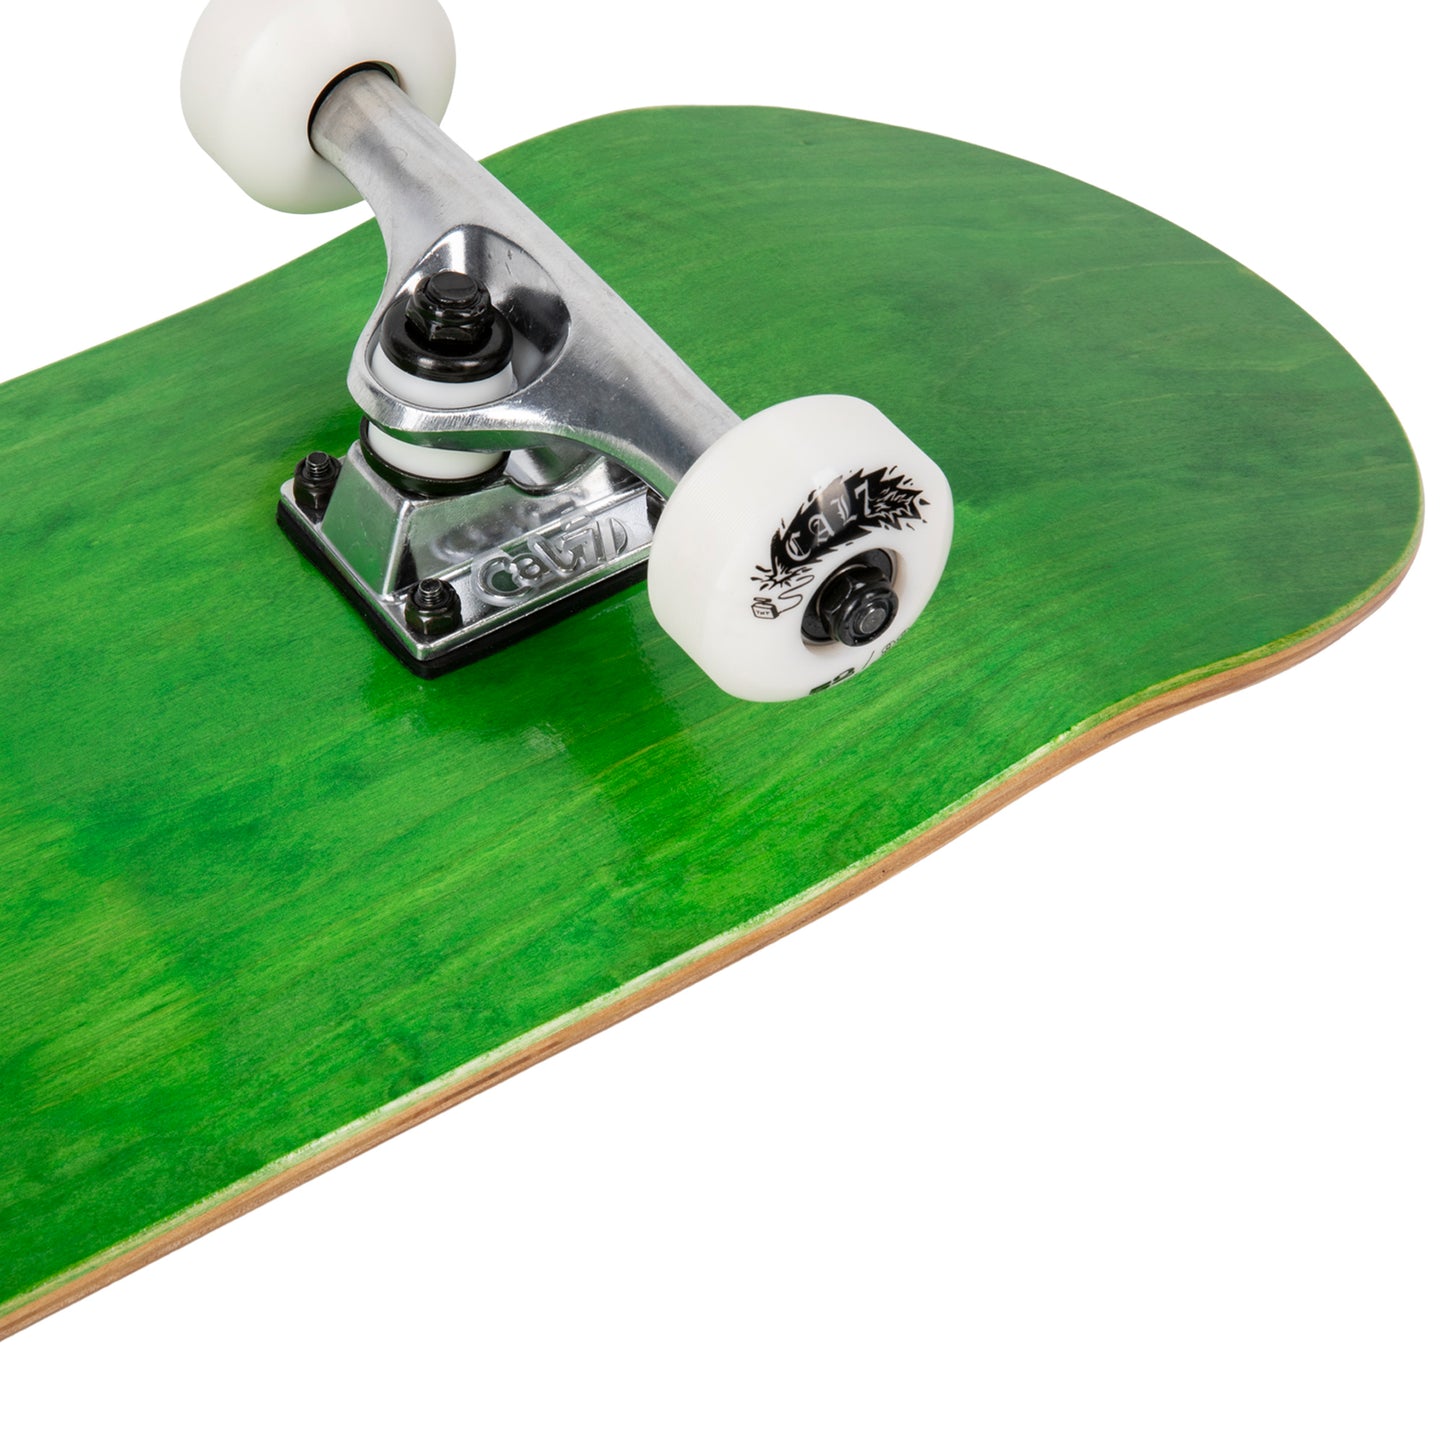 Cal 7 Complete 7.5/7.75/8-Inch Skateboard Meadow with Logo and Green Stain 